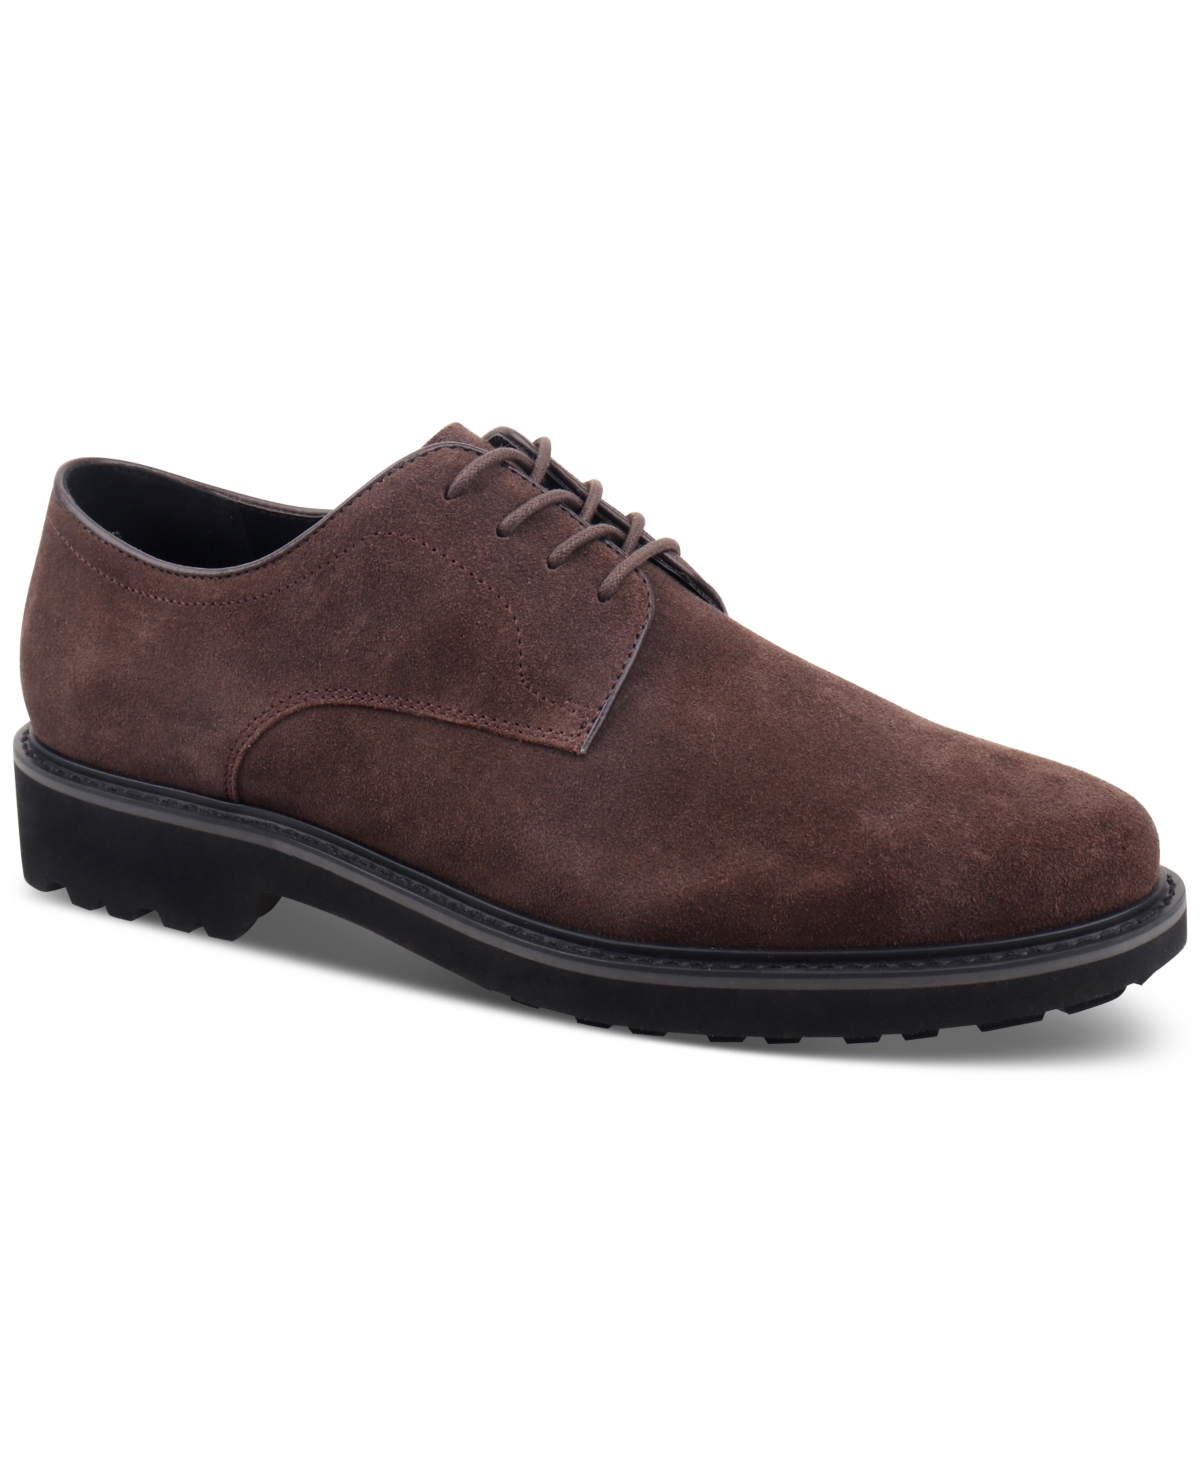 Men's Callan Lace-Up Derby Shoes, Created for Macy's - Brown Suede